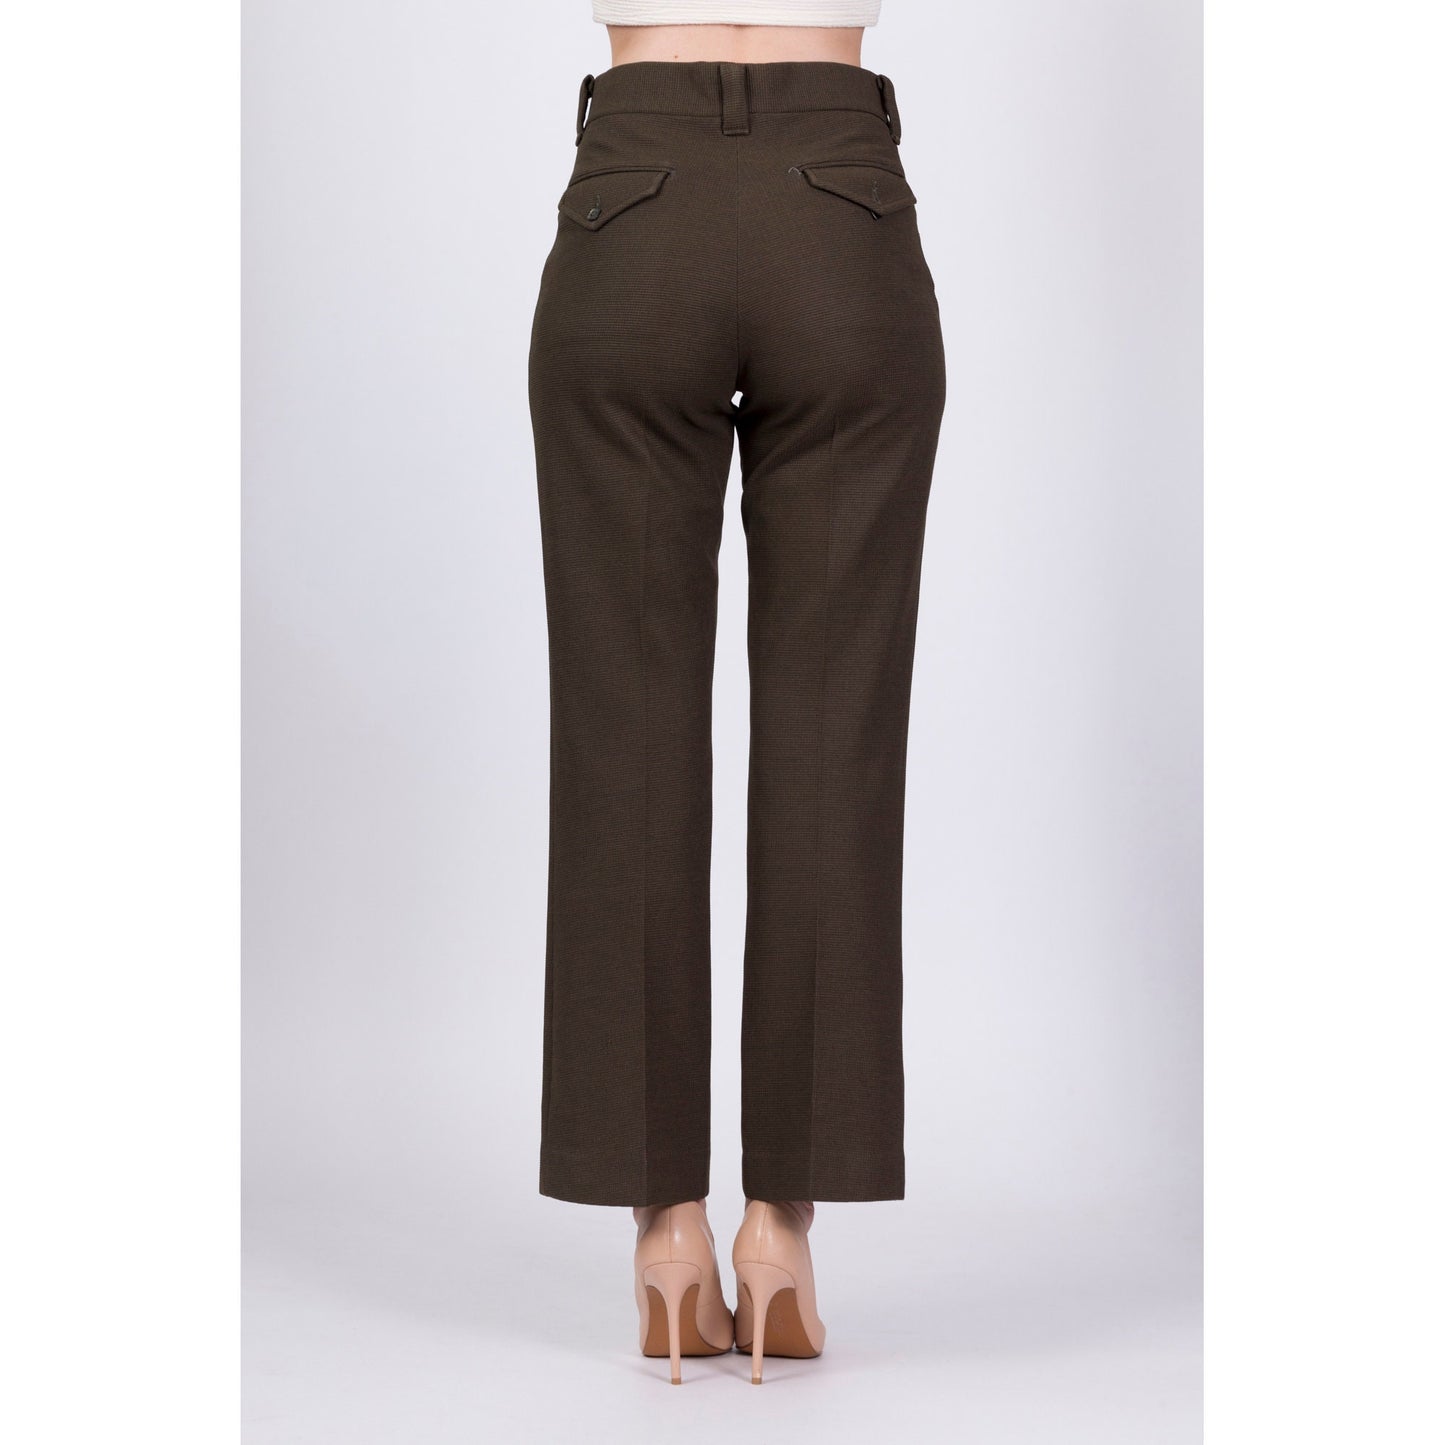 70s Olive Green Unisex High Waisted Trousers - 29" Waist 